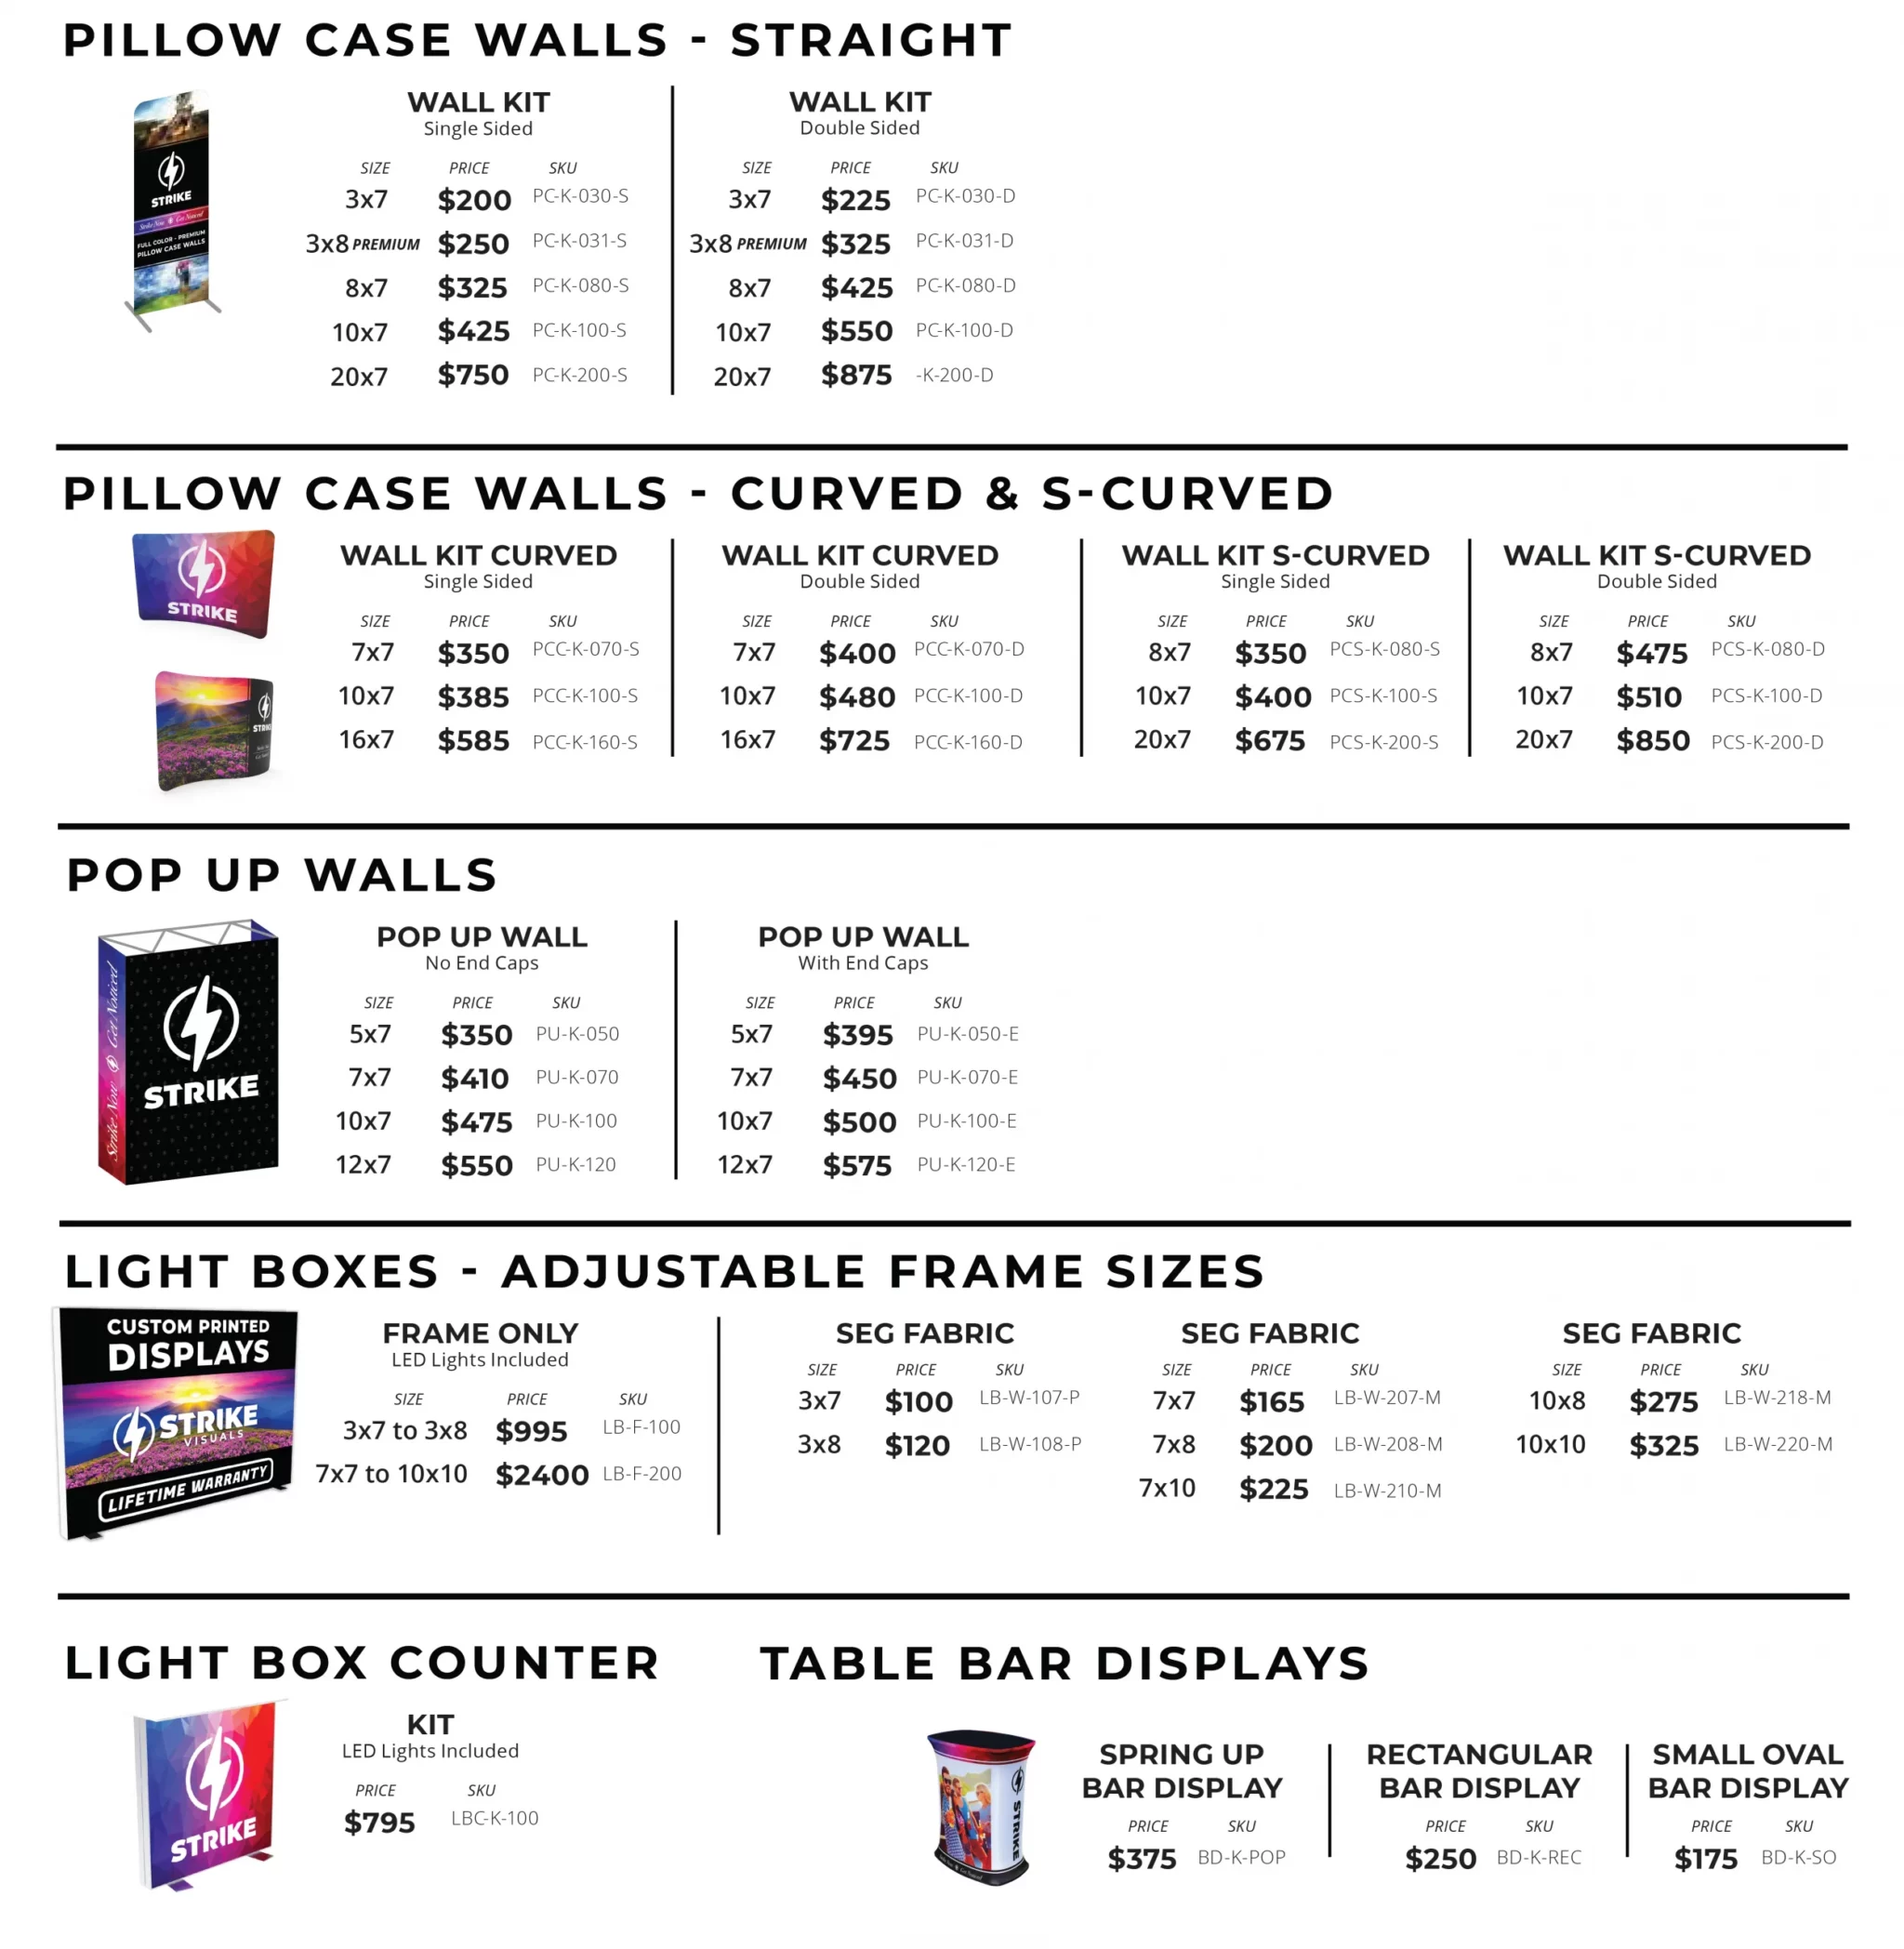 resellers pricing guide for pillow case walls - straight, pillow case walls - curved and s-curved, pop up walls, light boxes - adjustable frame sizes, light box counter, table bar displays.png